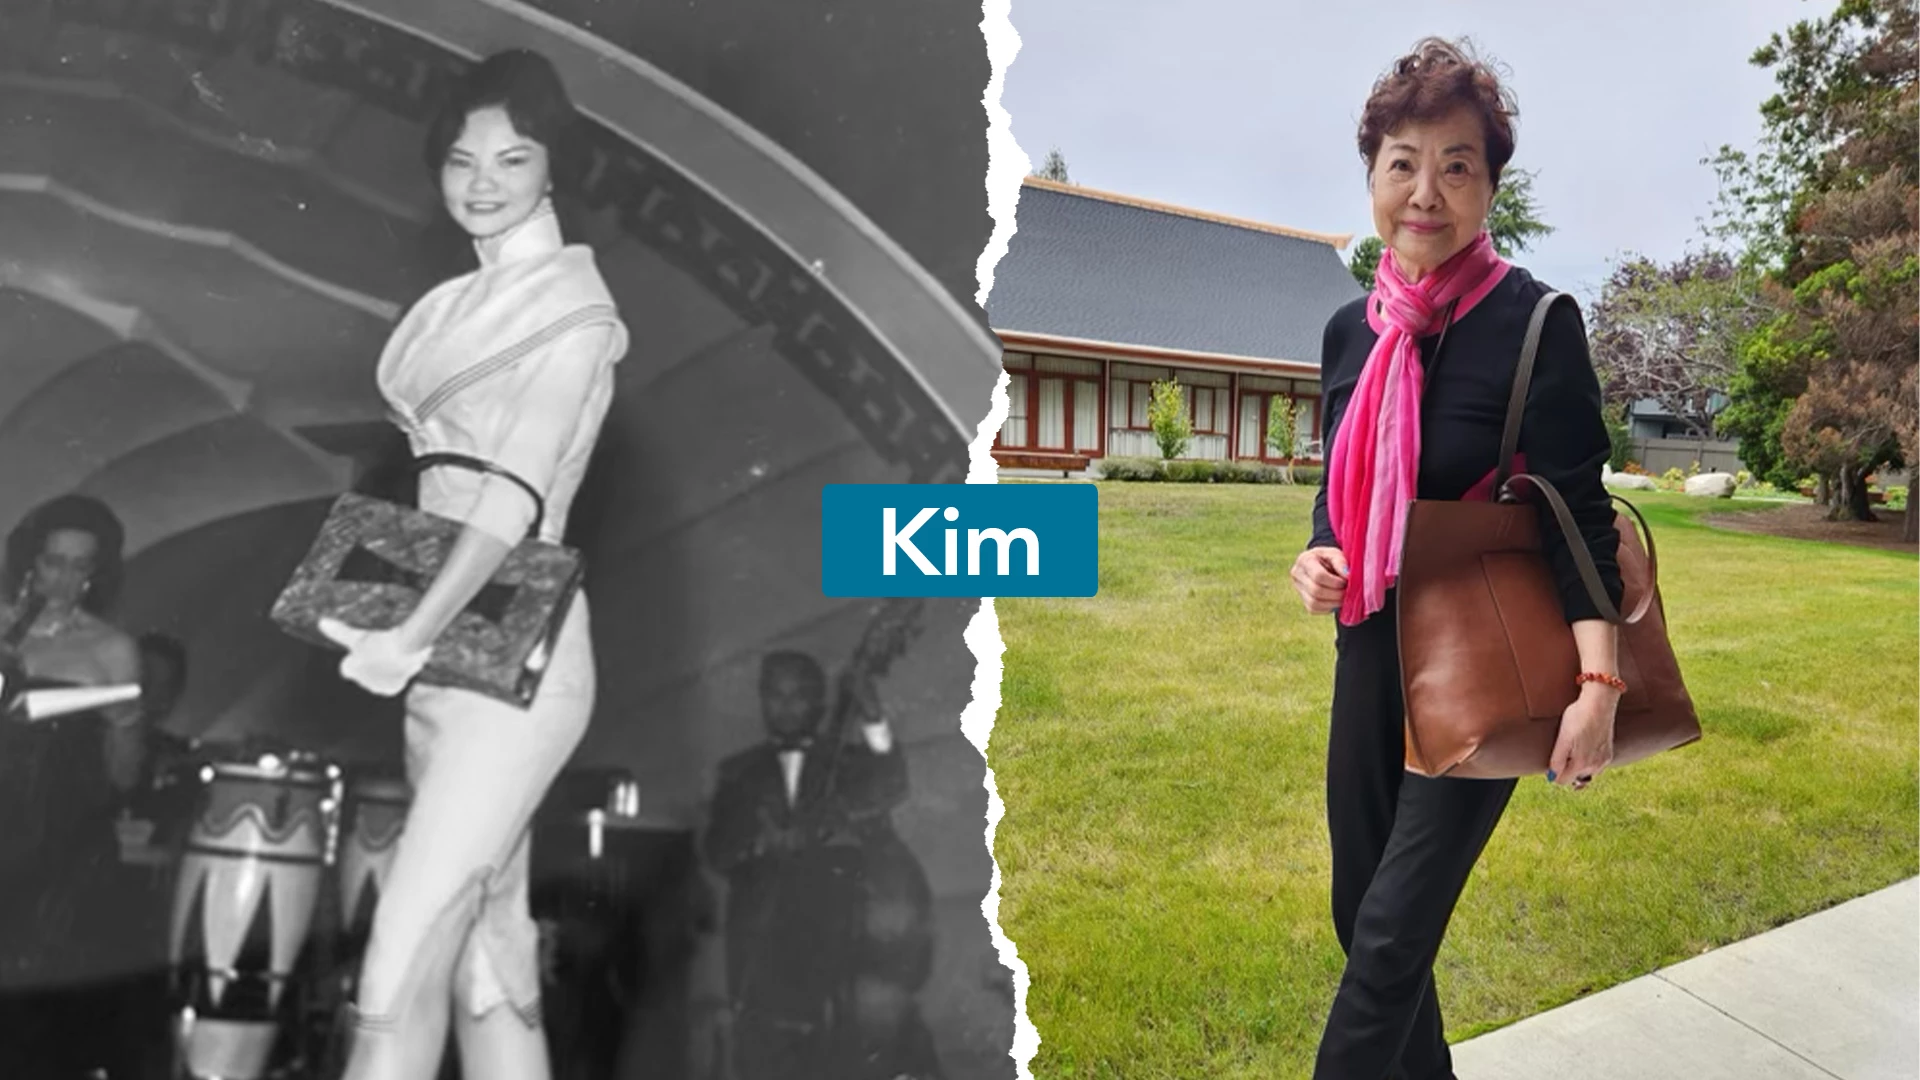 An old photo of Kim and a new photo of Kim